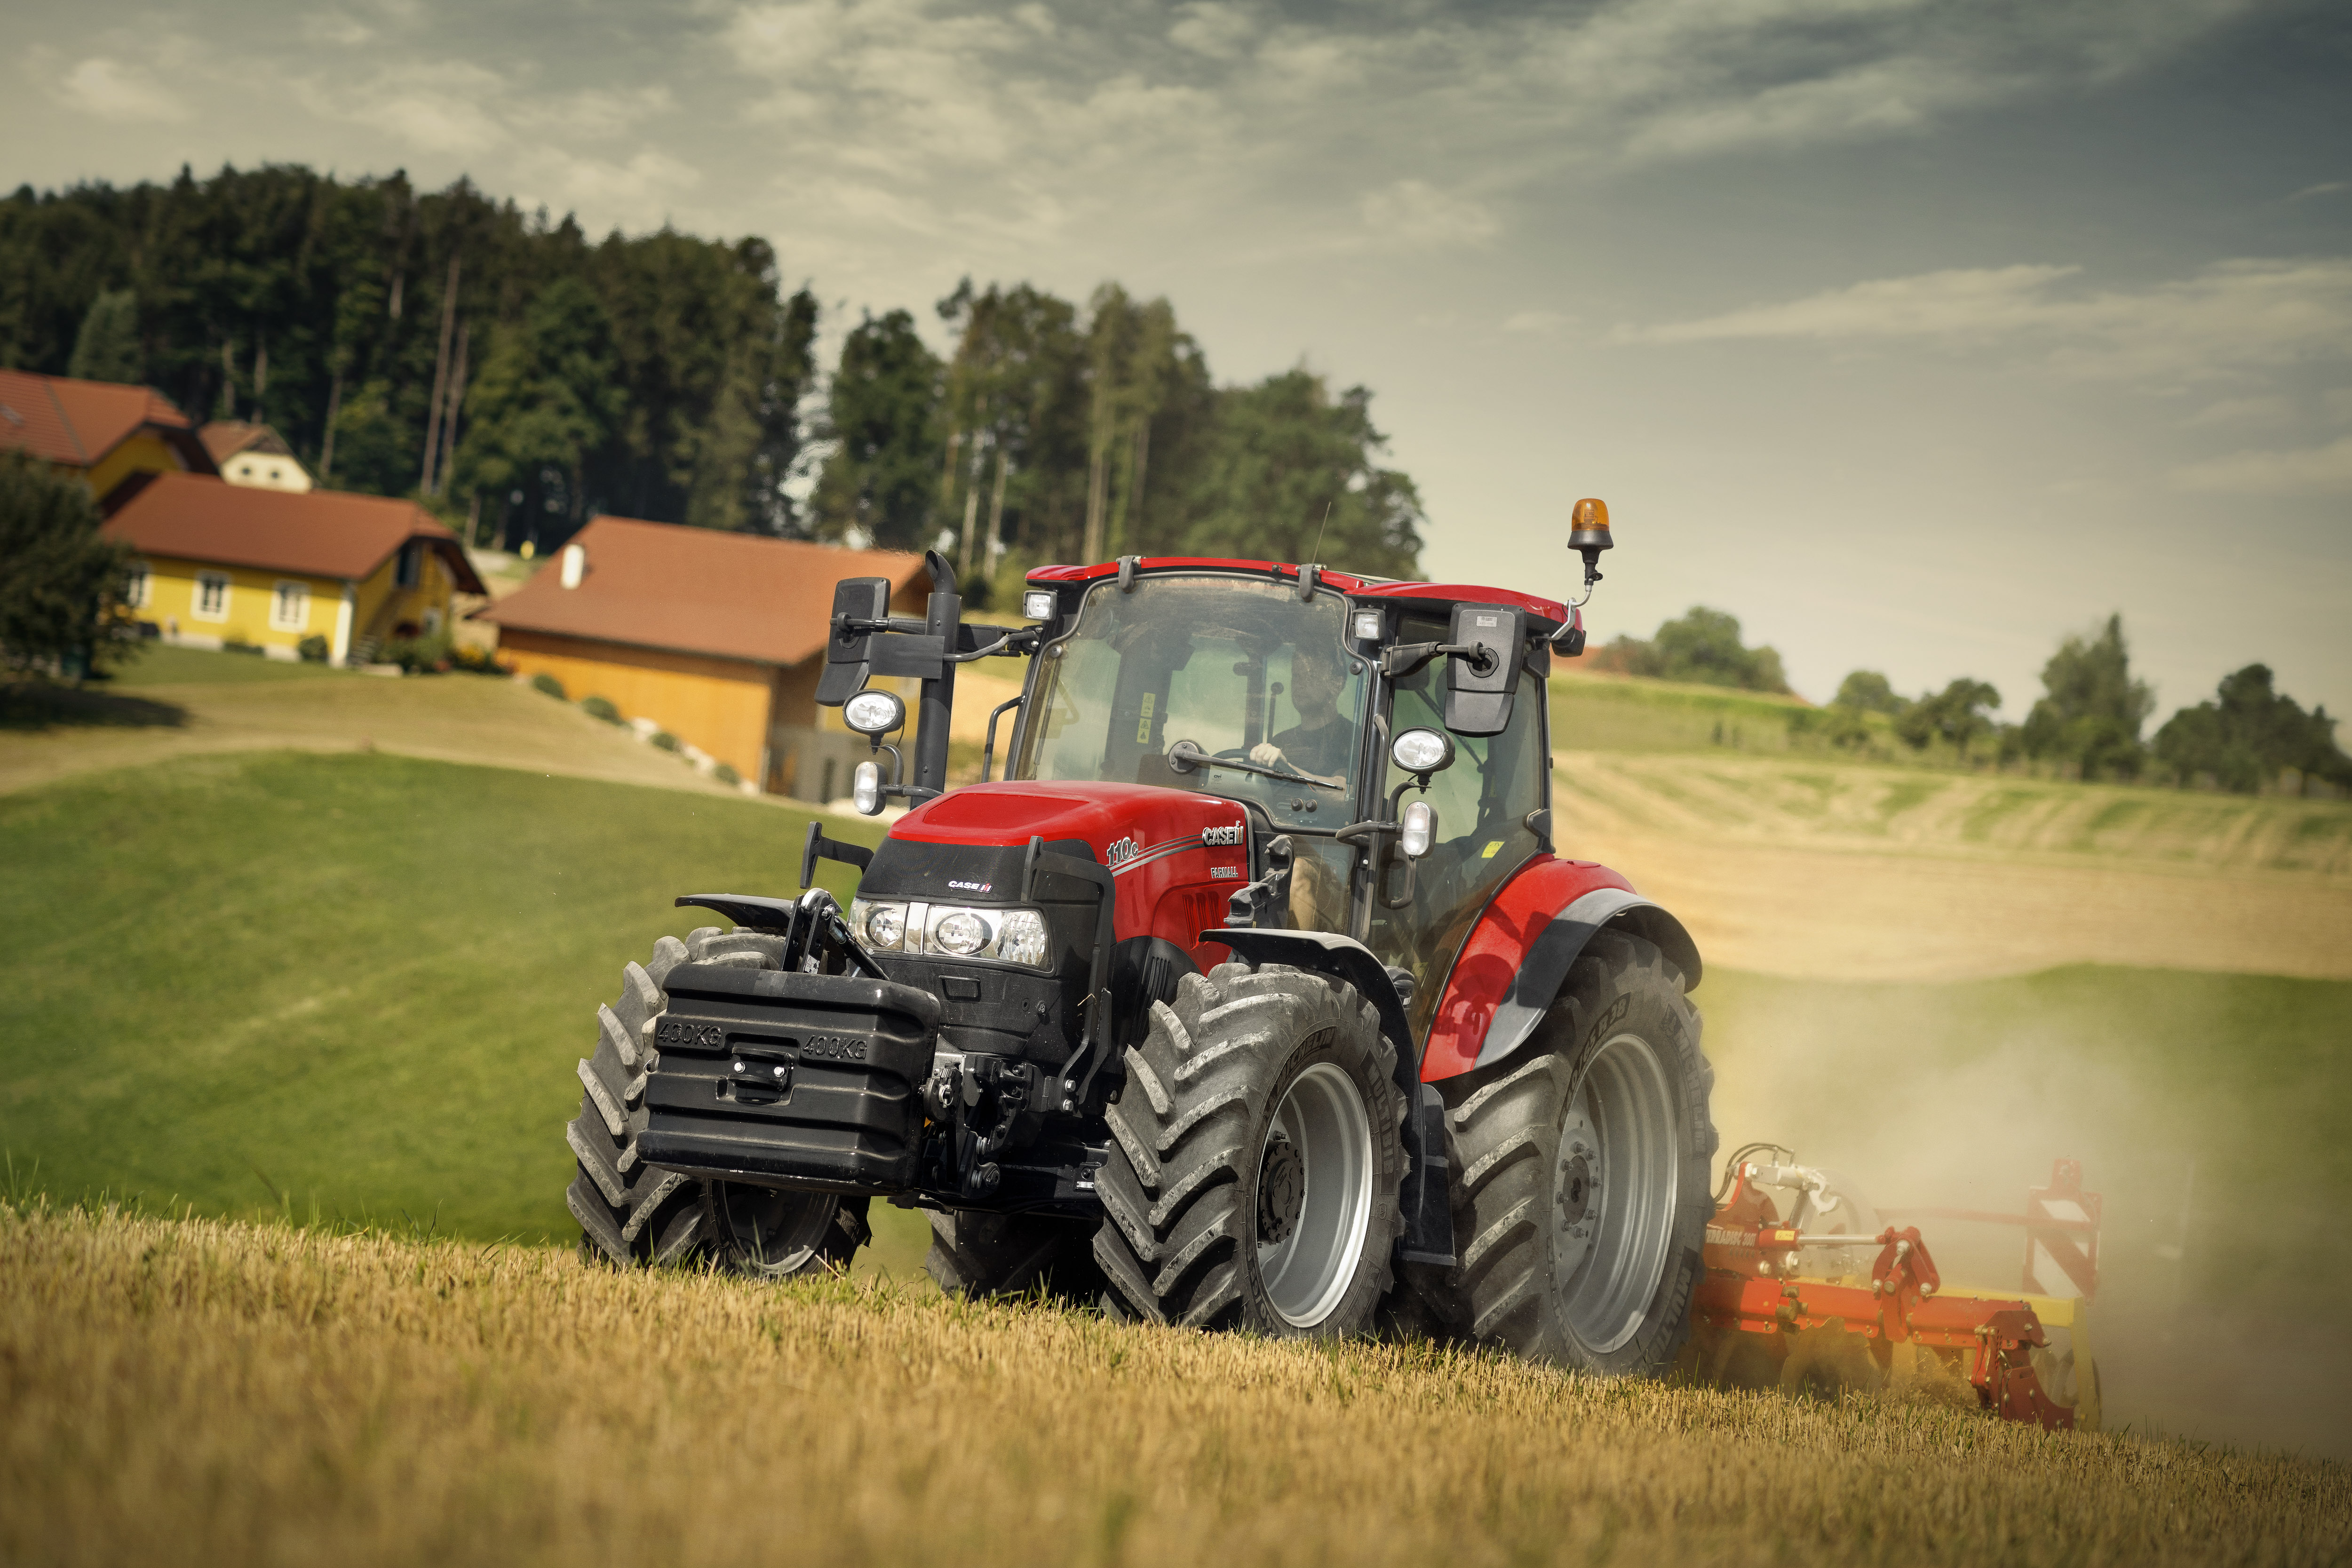 CASE IH extends Farmall range with new 100–120HP C selection models